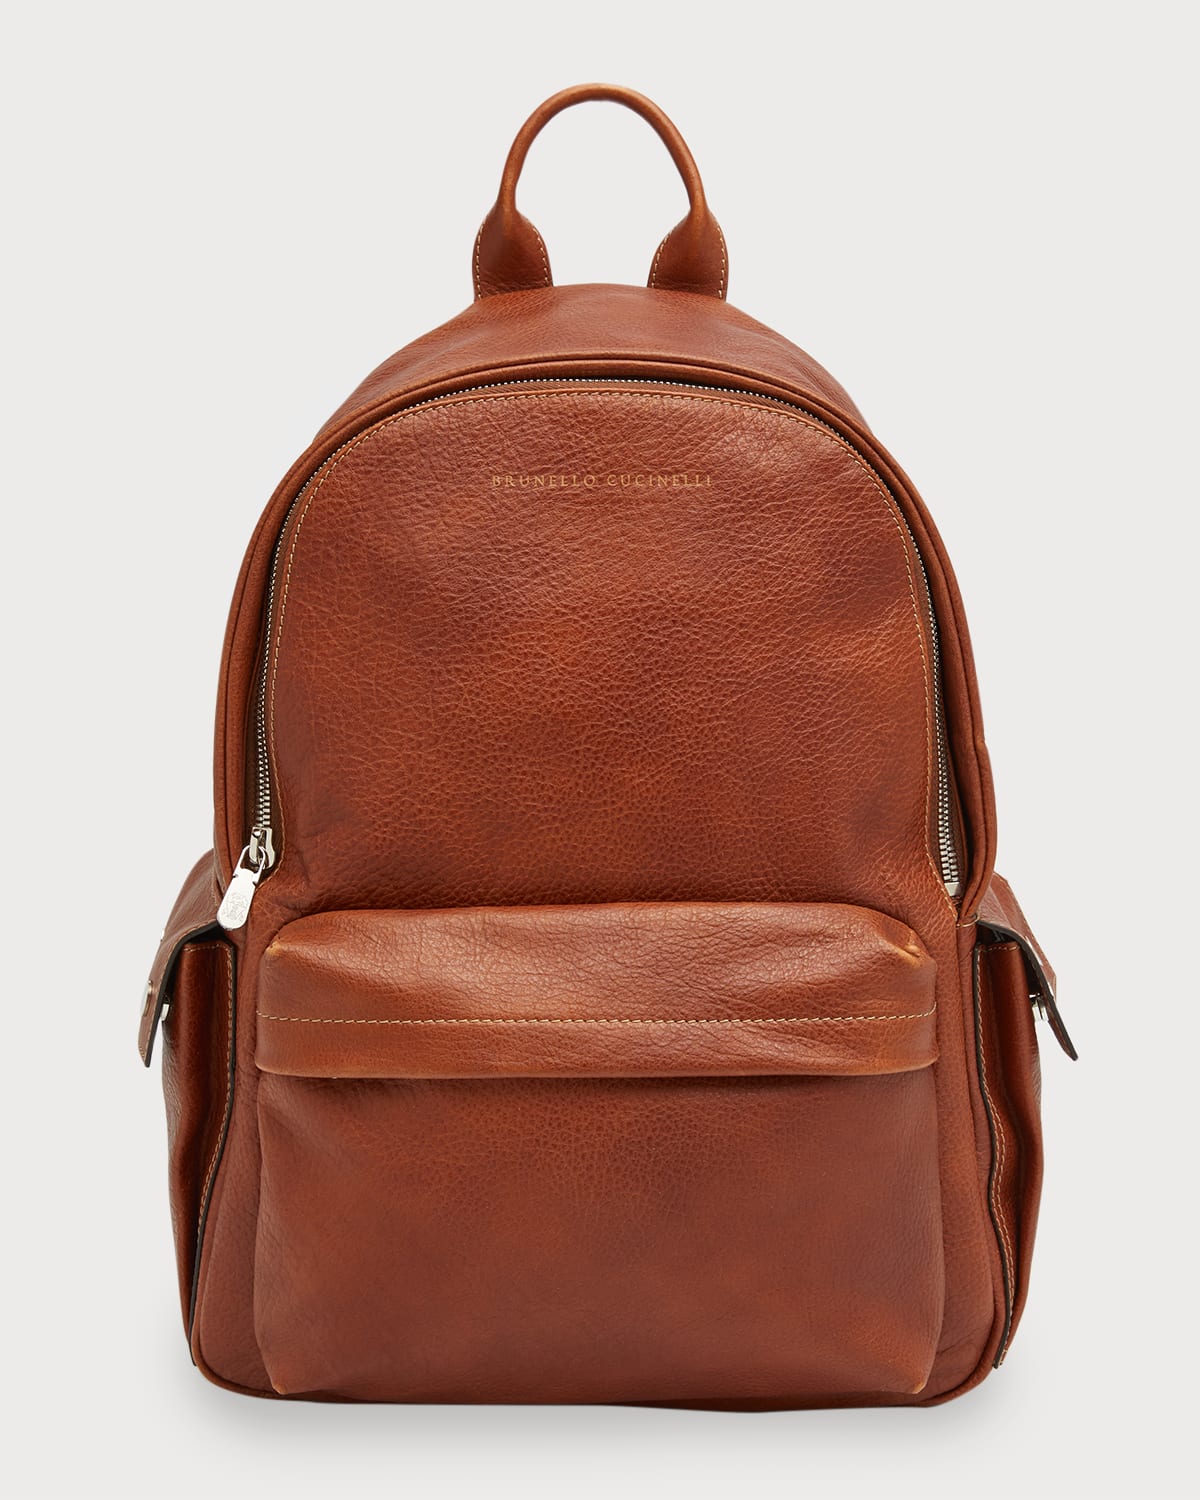 Men's Grained Leather Backpack